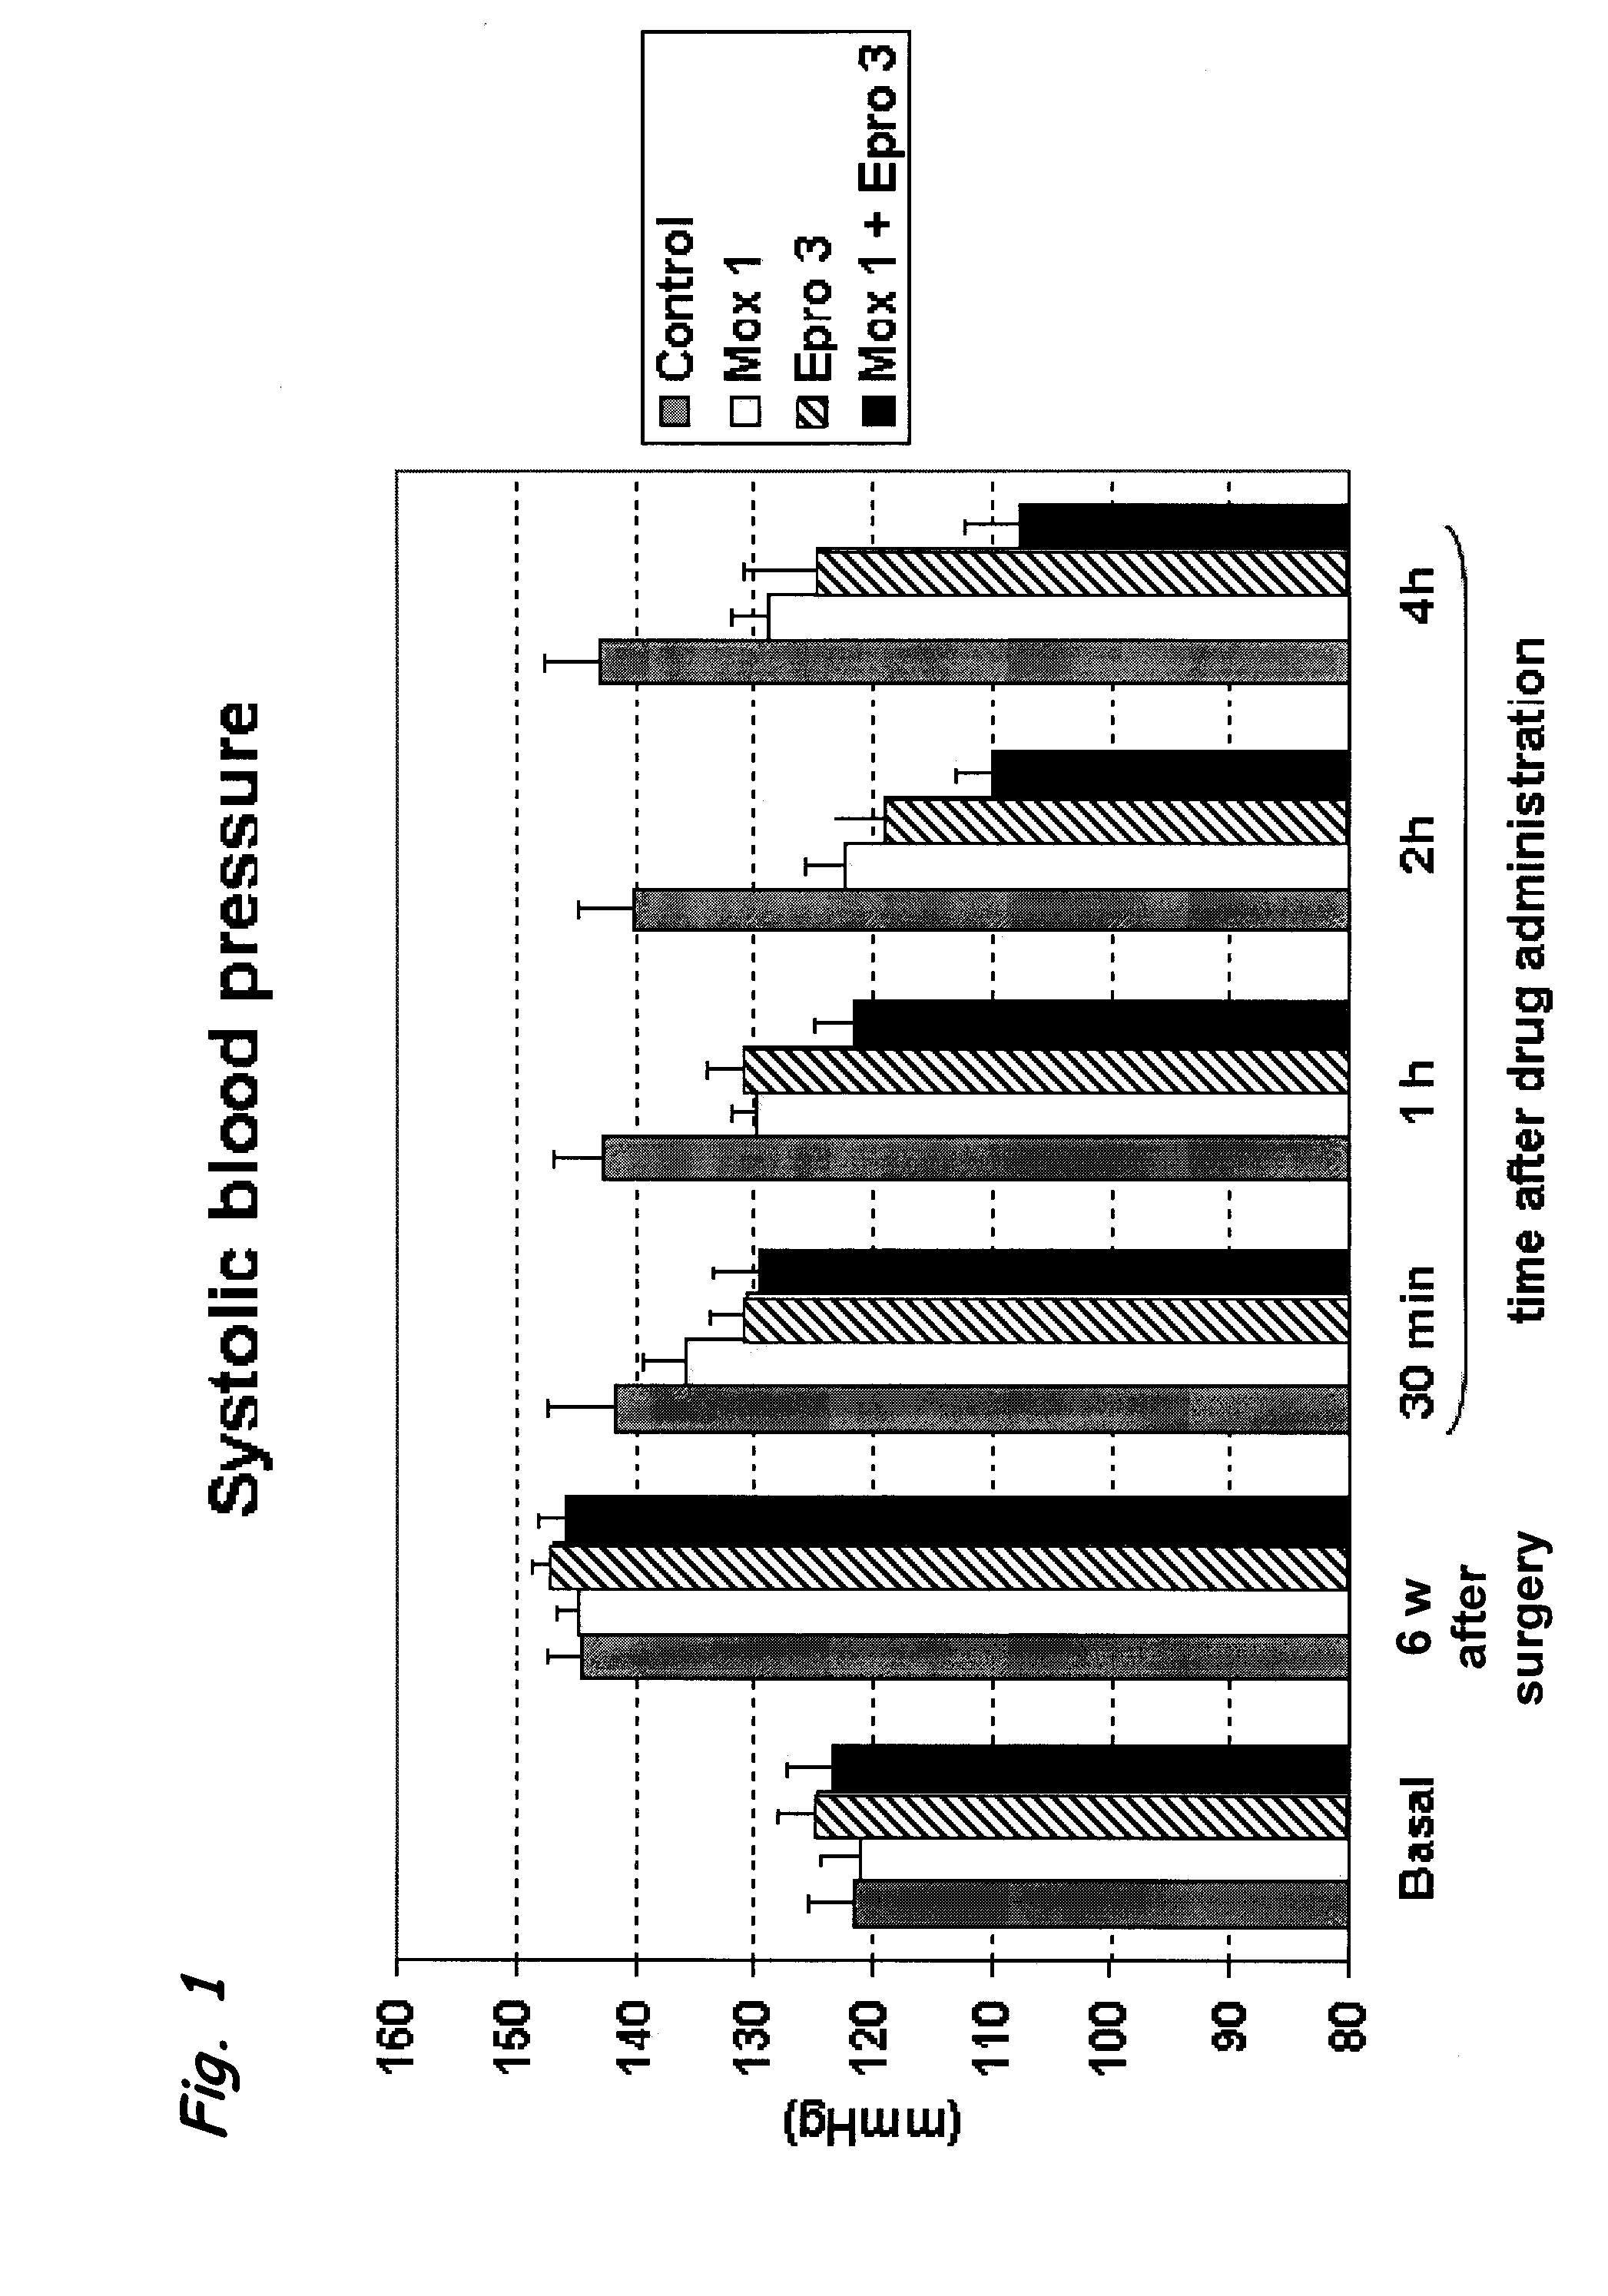 Pharmaceutical Compositions Comprising a Selective I1 Imidazoline Receptor Agonist and an Angiotensin II Receptor Blocker